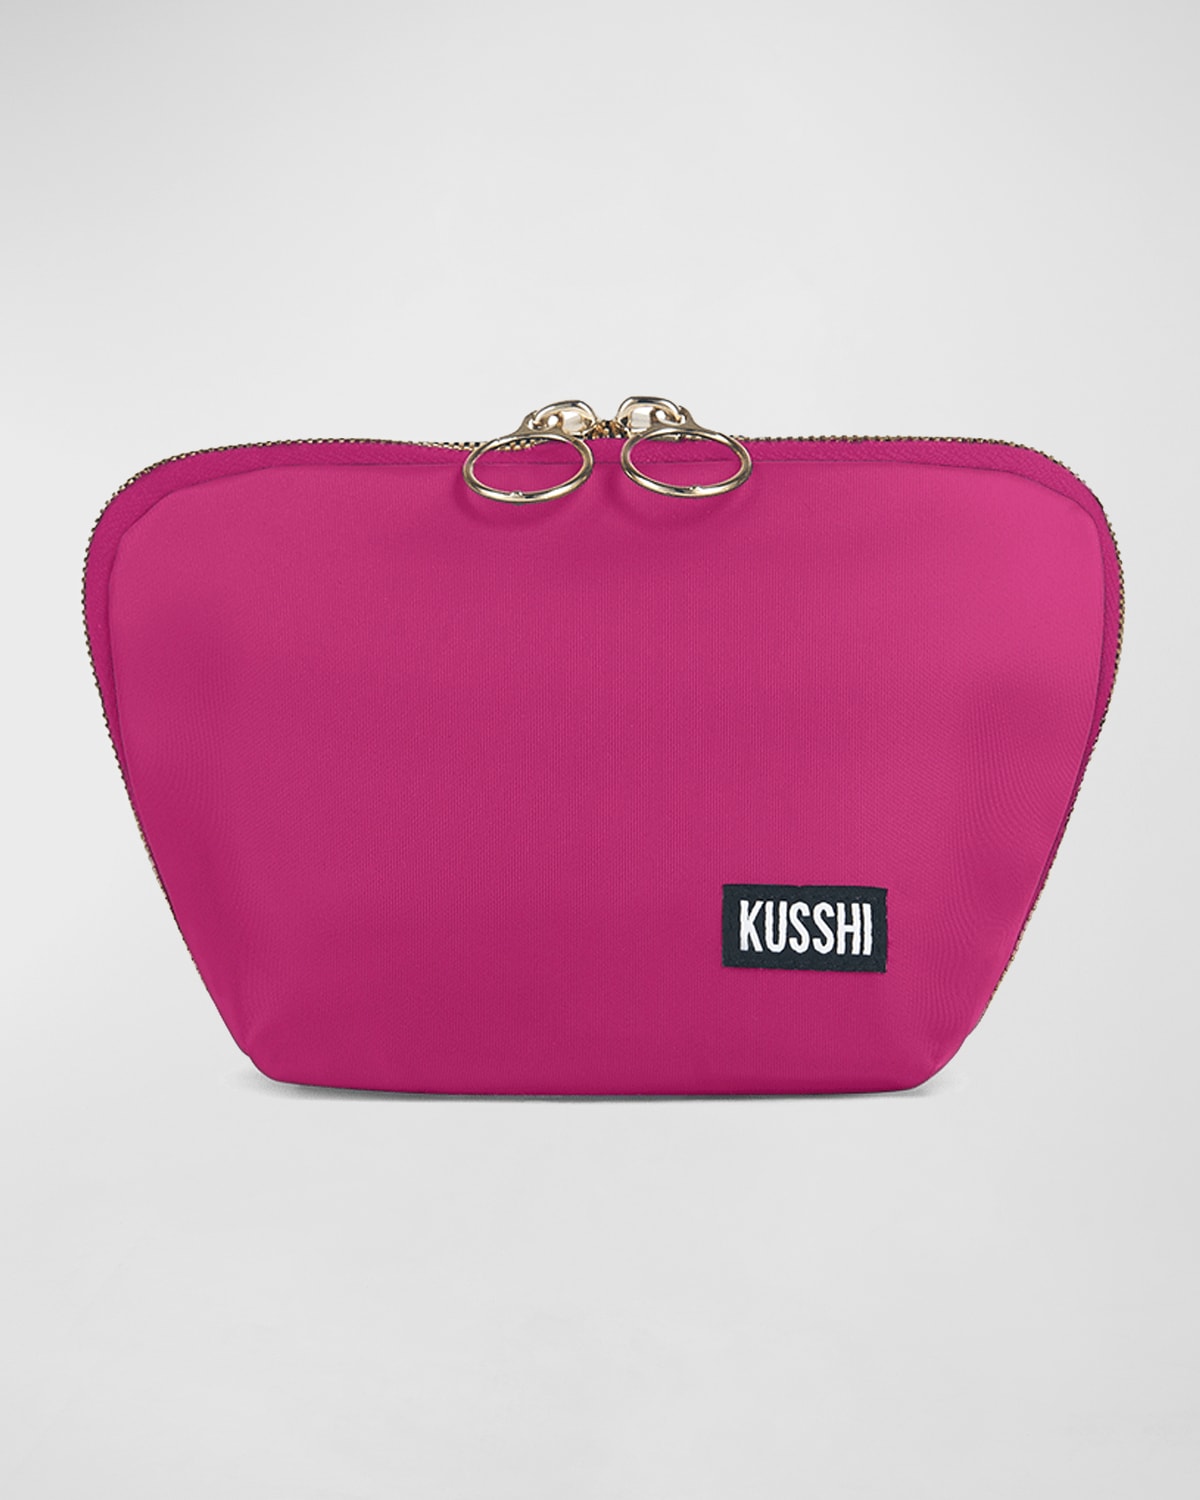 Kusshi Everyday Makeup Bag In Pink/teal Nylon